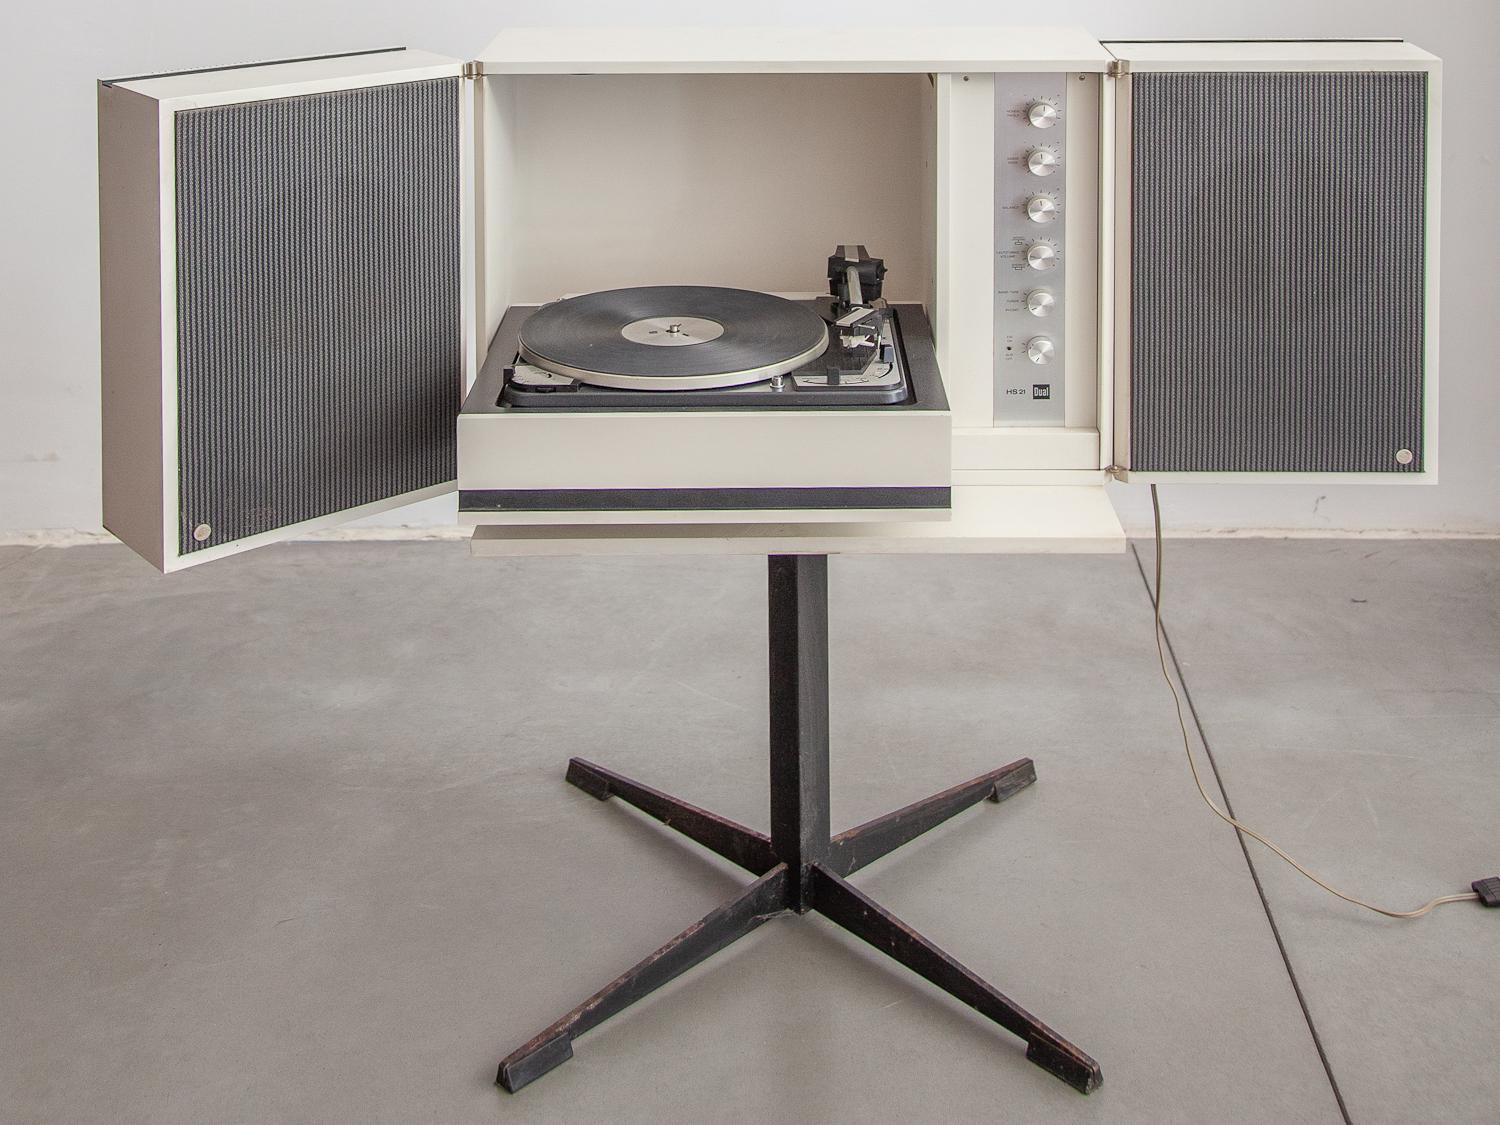 Very original and unique in this genre of design, the compactness of the stereo furniture by opening the speakers left and right and placing the record table down for use. This Wega Studio 3207 Hi-Fi console table from the pioneering German audio